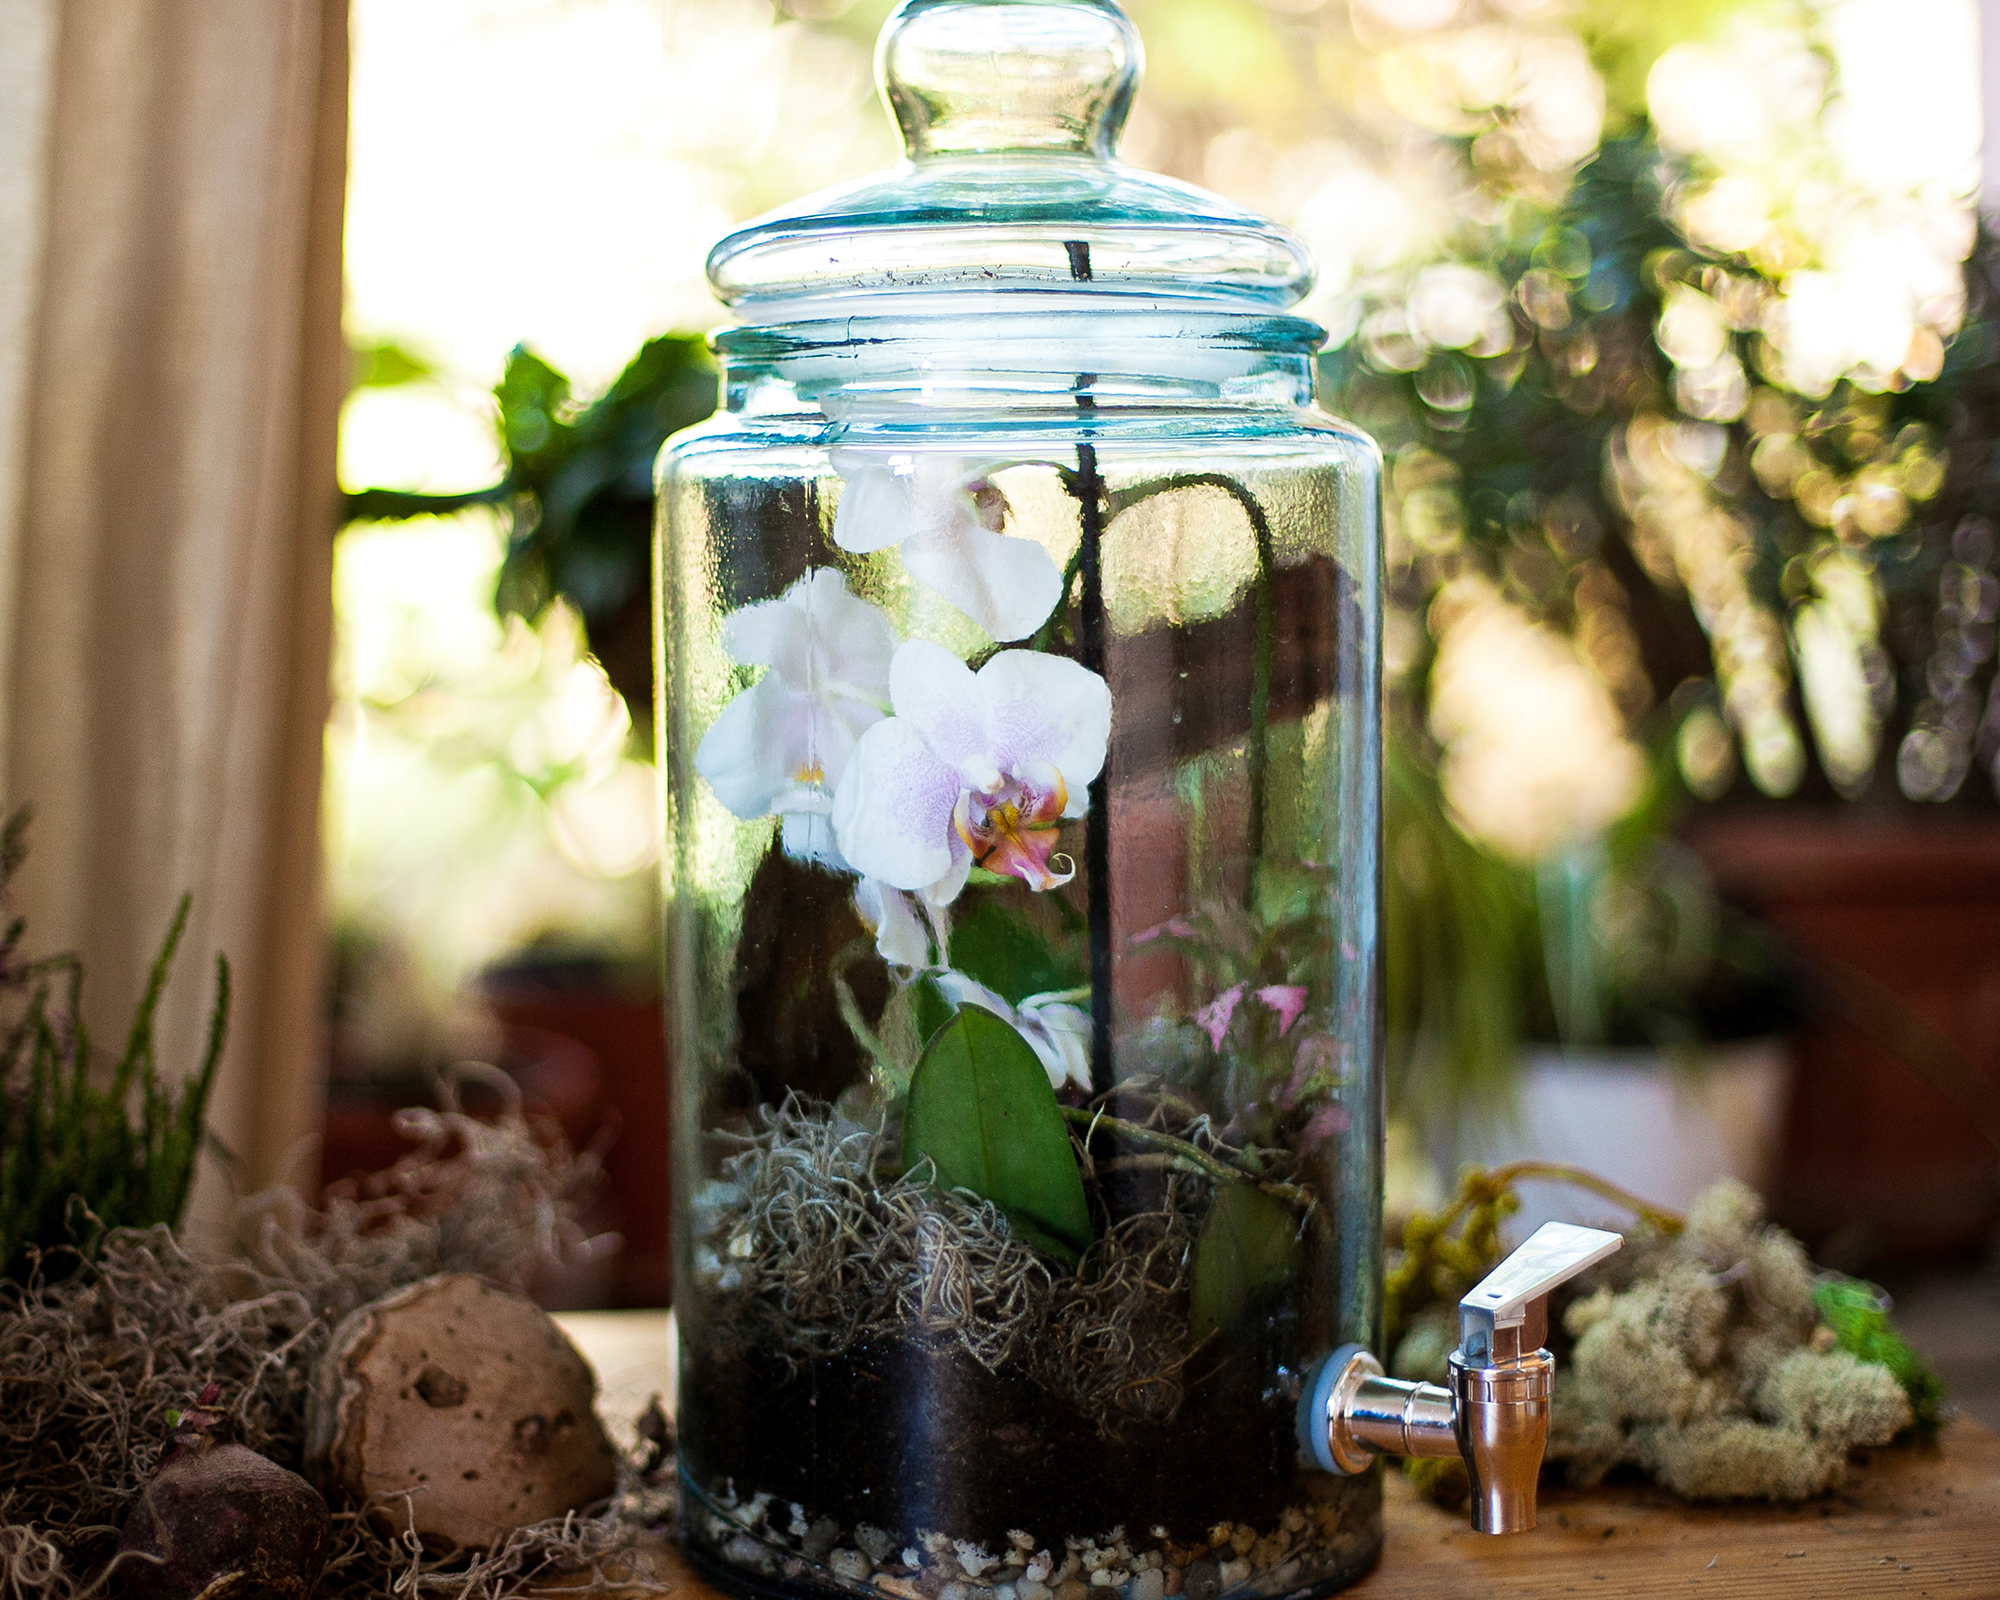 When learning how to make an orchid terrarium, you need to decide whether it should be open or closed. This closed terrarium contains a beautiful white orchid